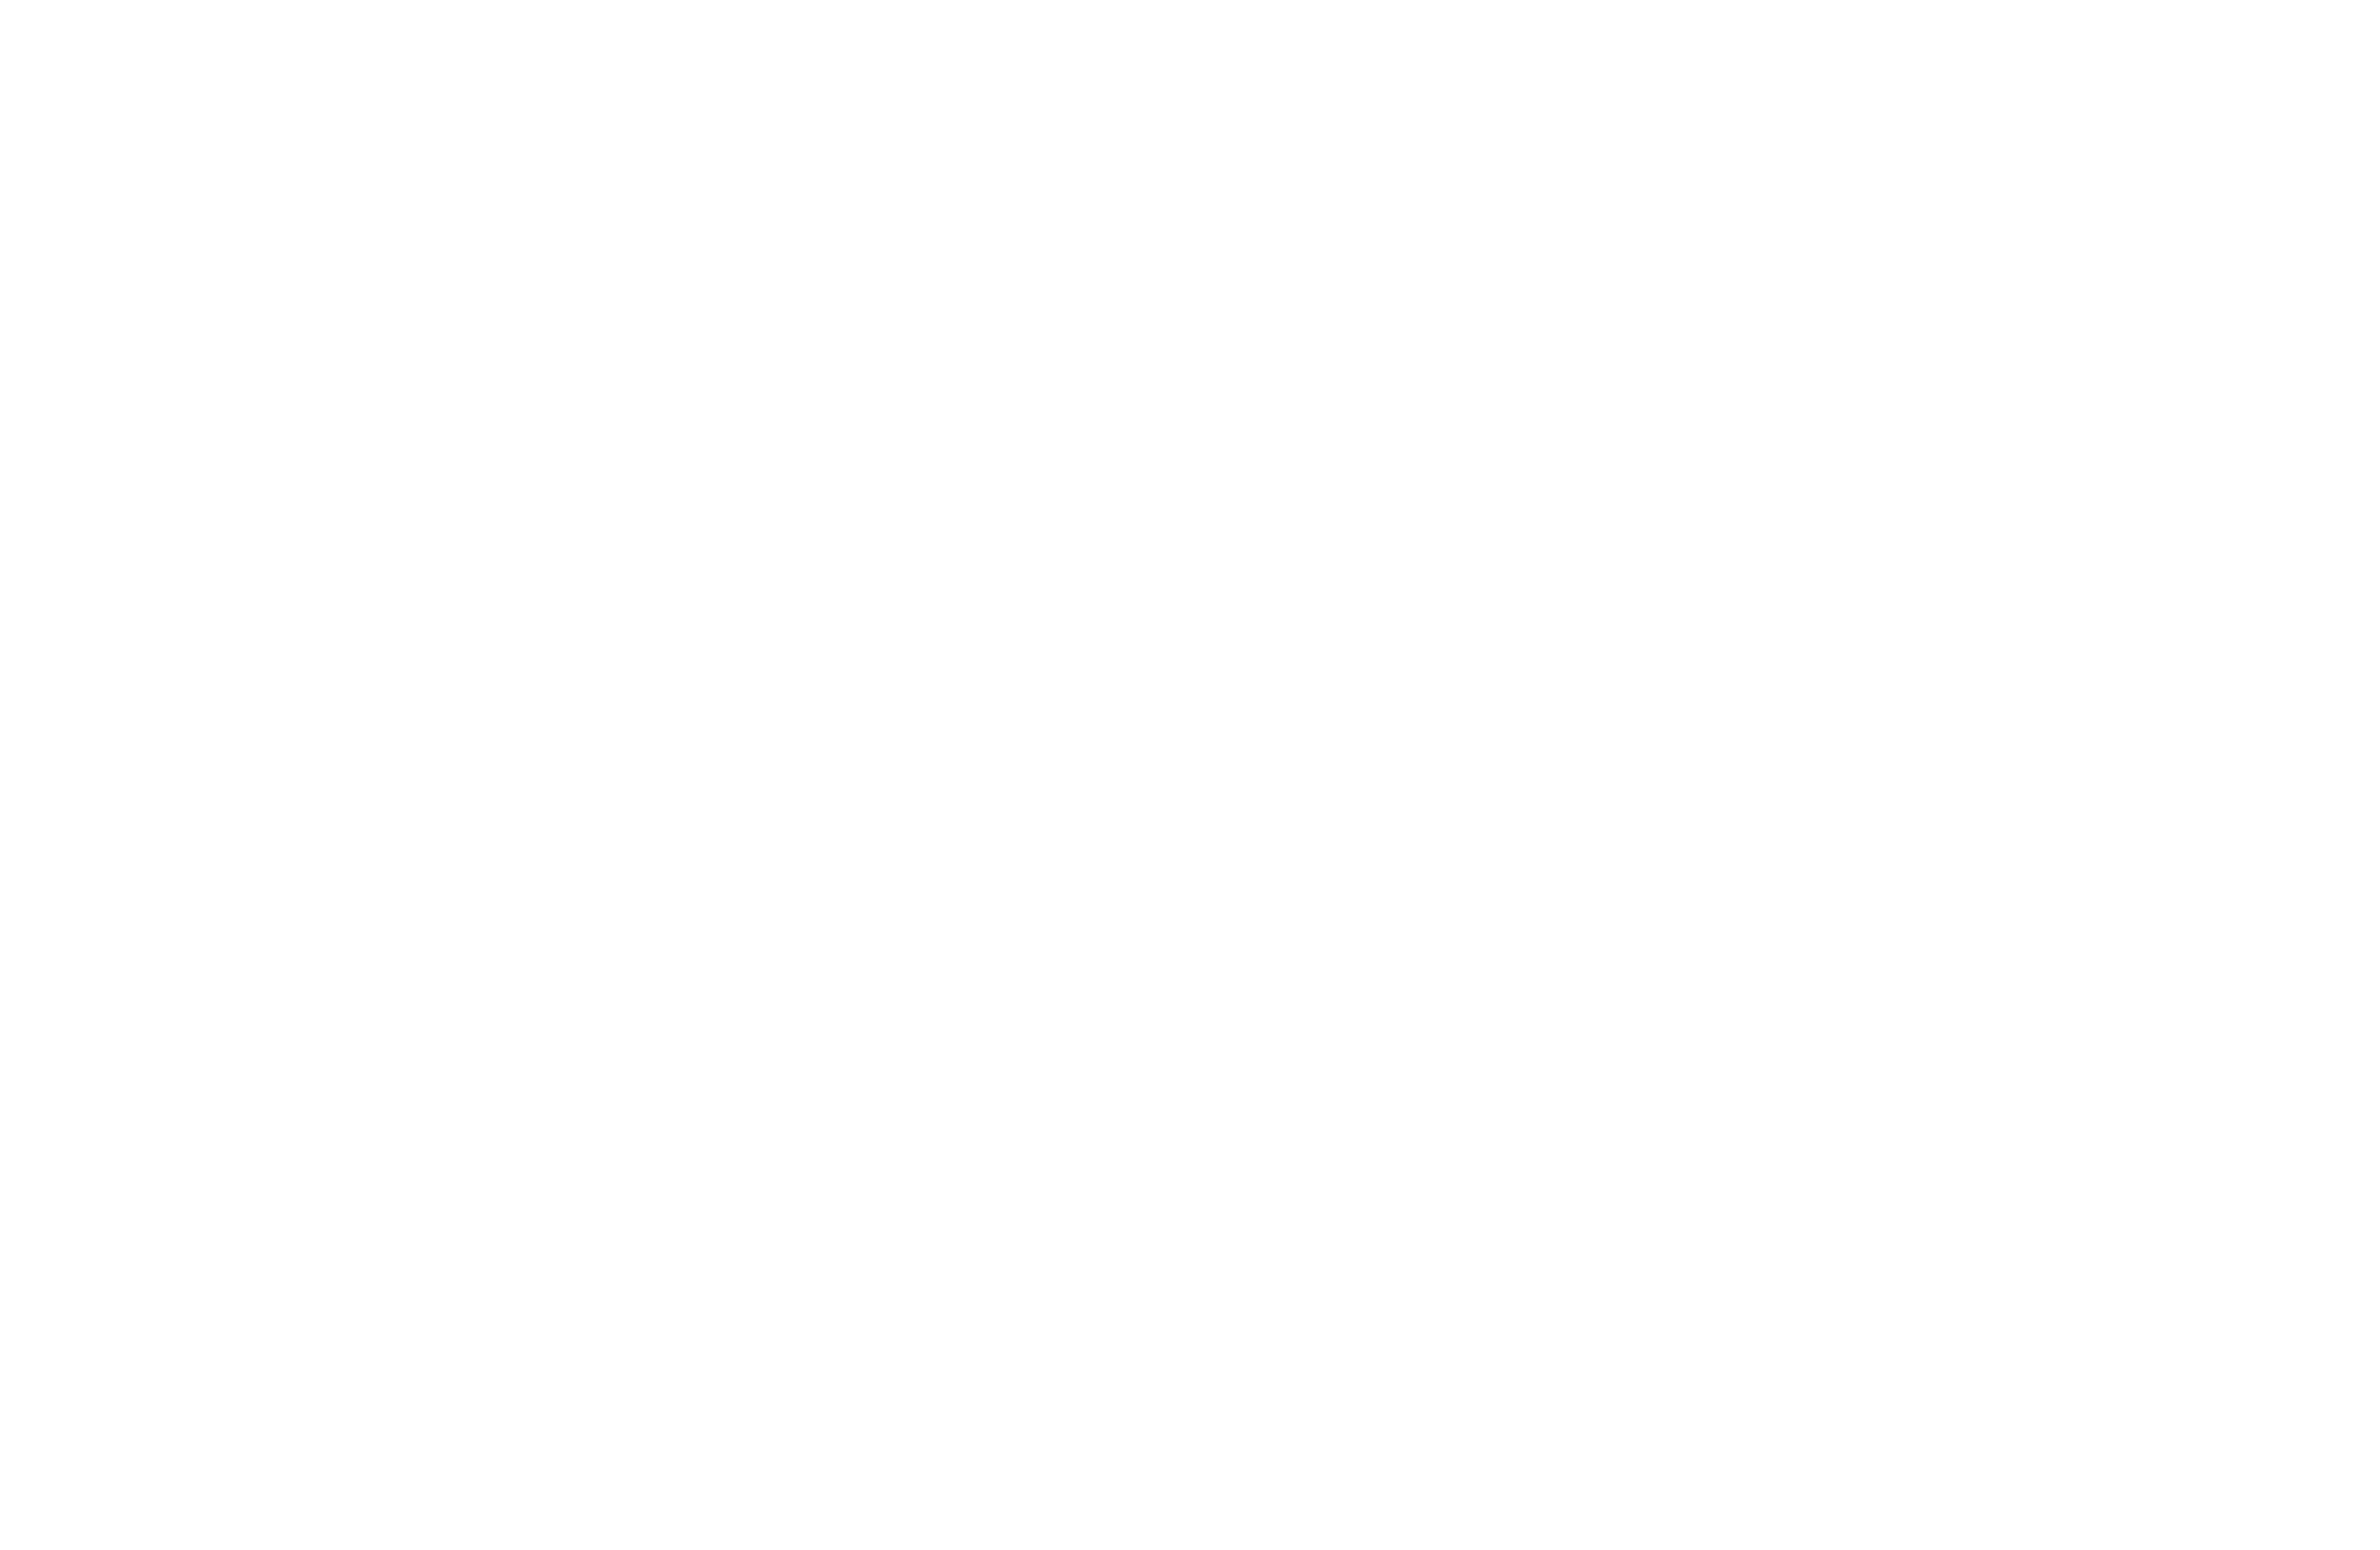 Starlite Campbell Band